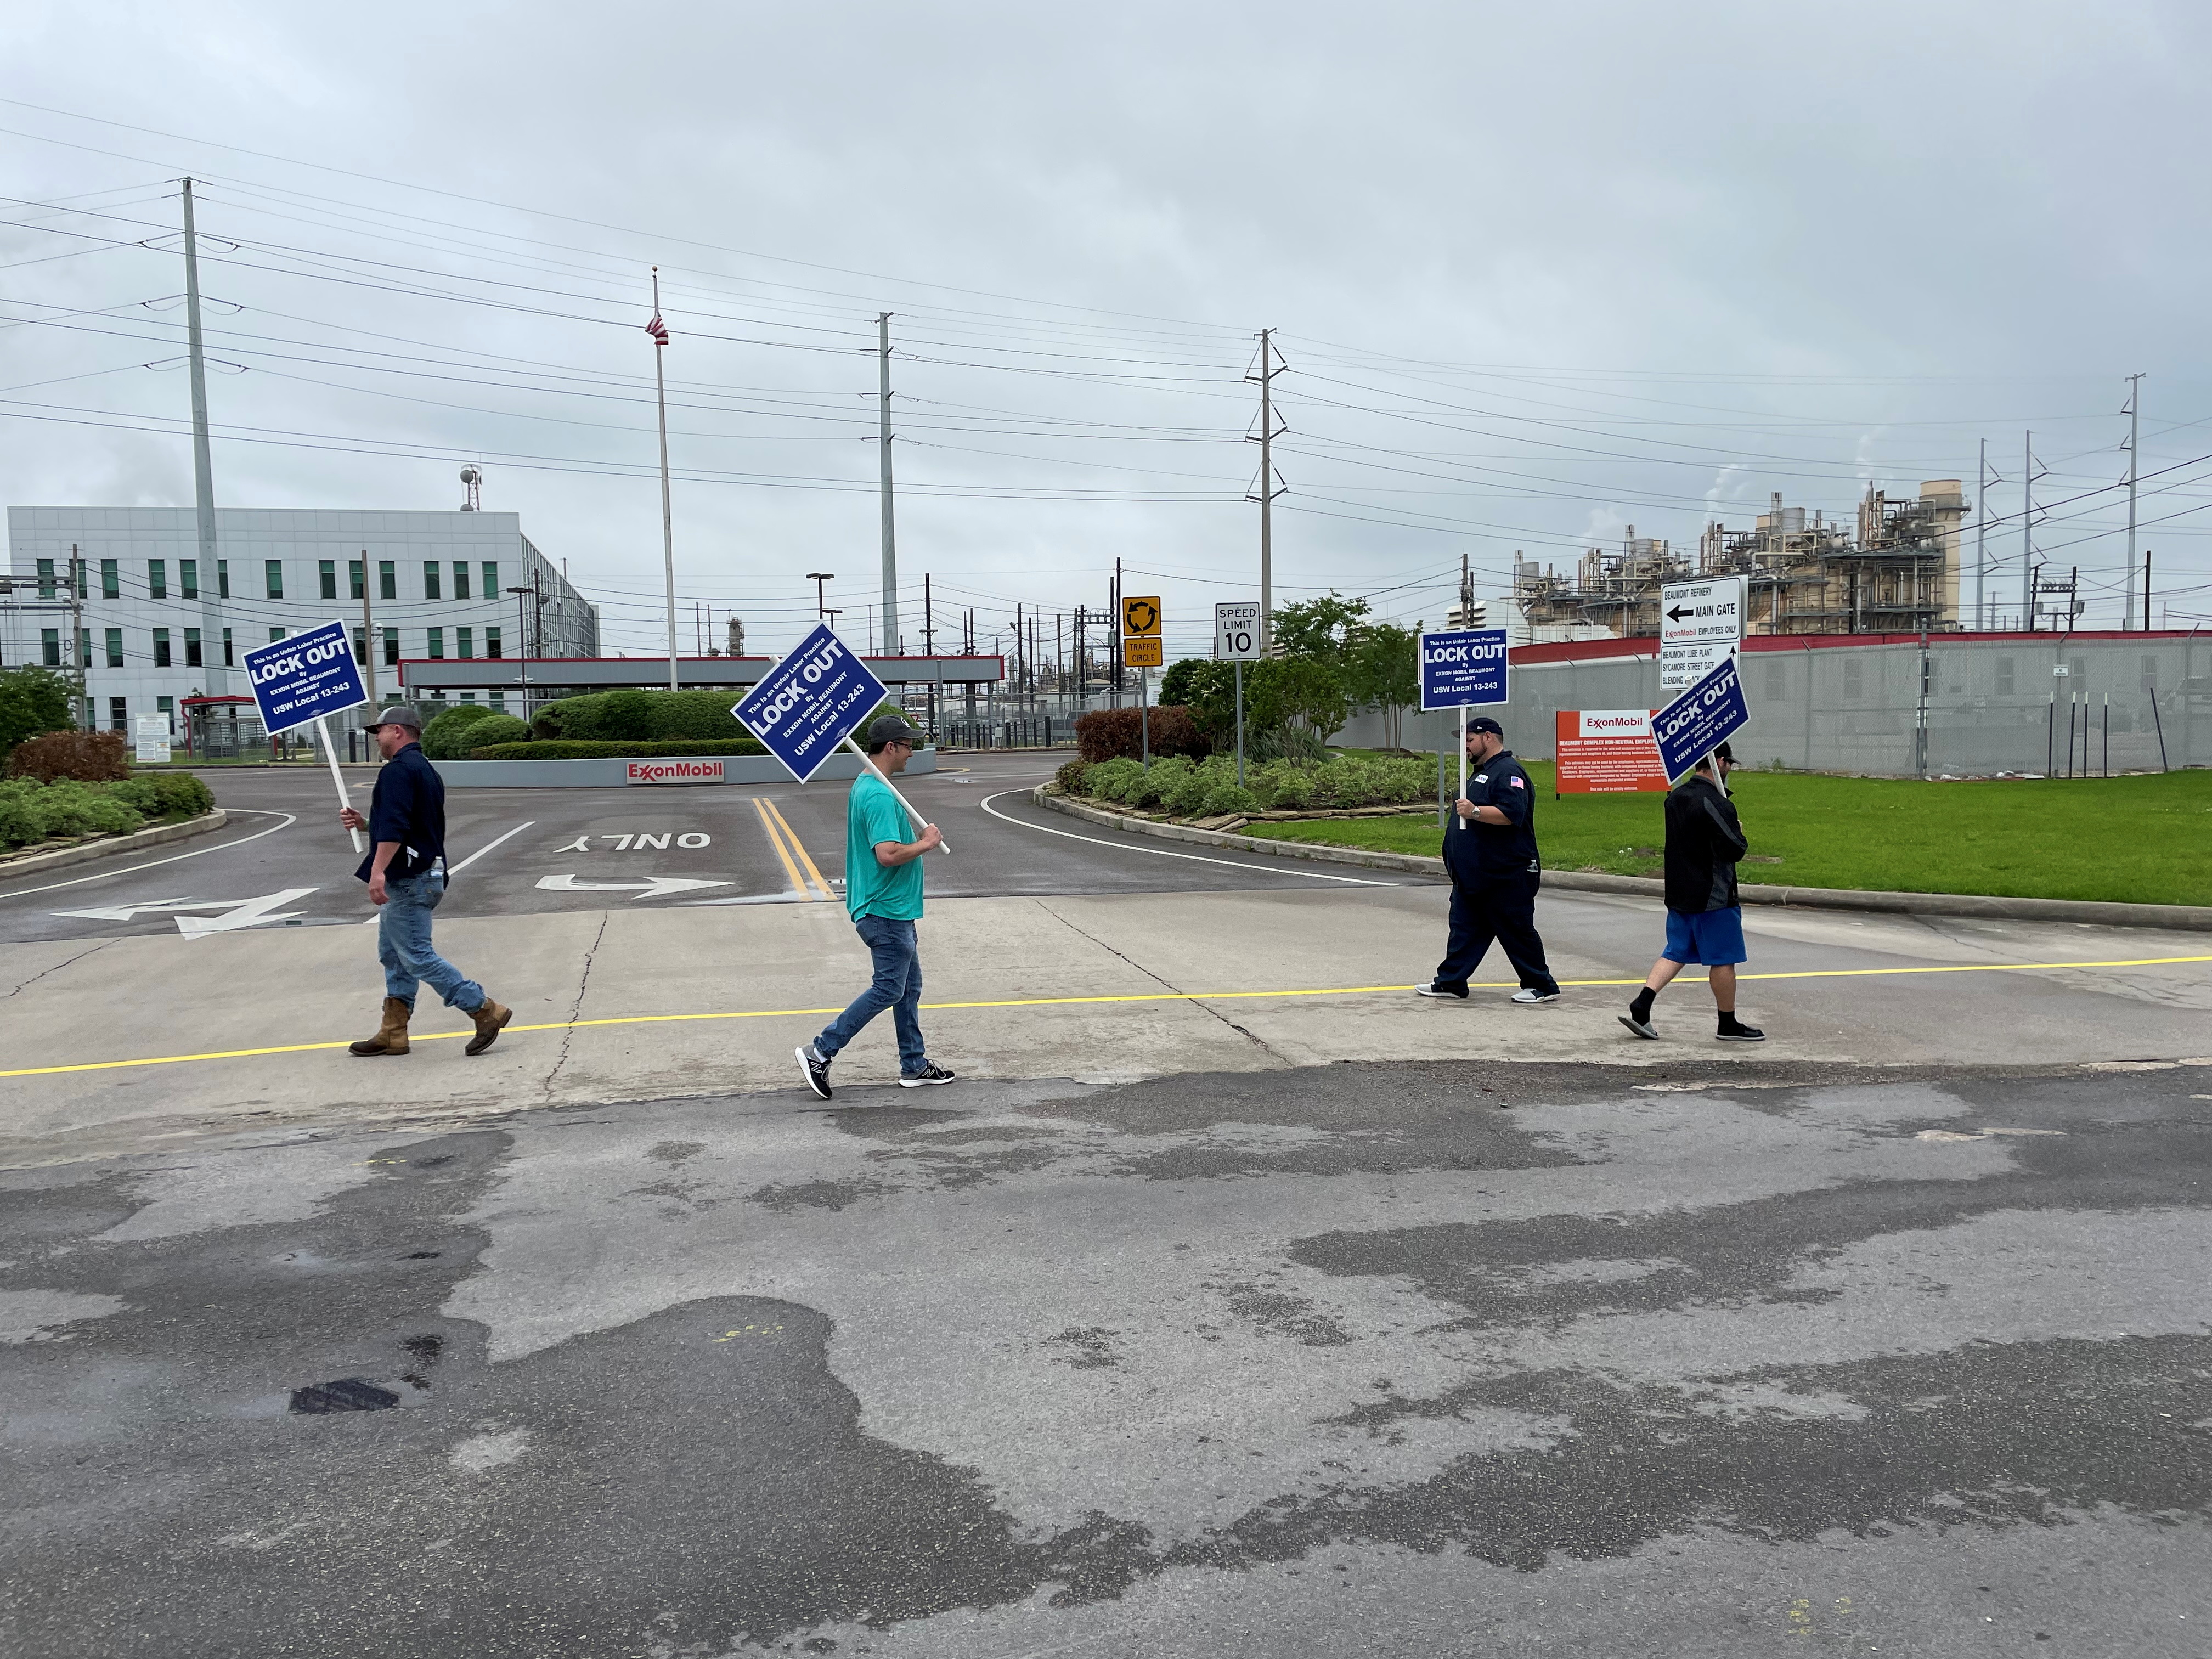 United Steelworkers union members picket outside the Exxon Mobil Beaumont, after being locked out of the plant by the company, in Beaumont, Texas, May 1, 2021.  REUTERS/Erwin Seba